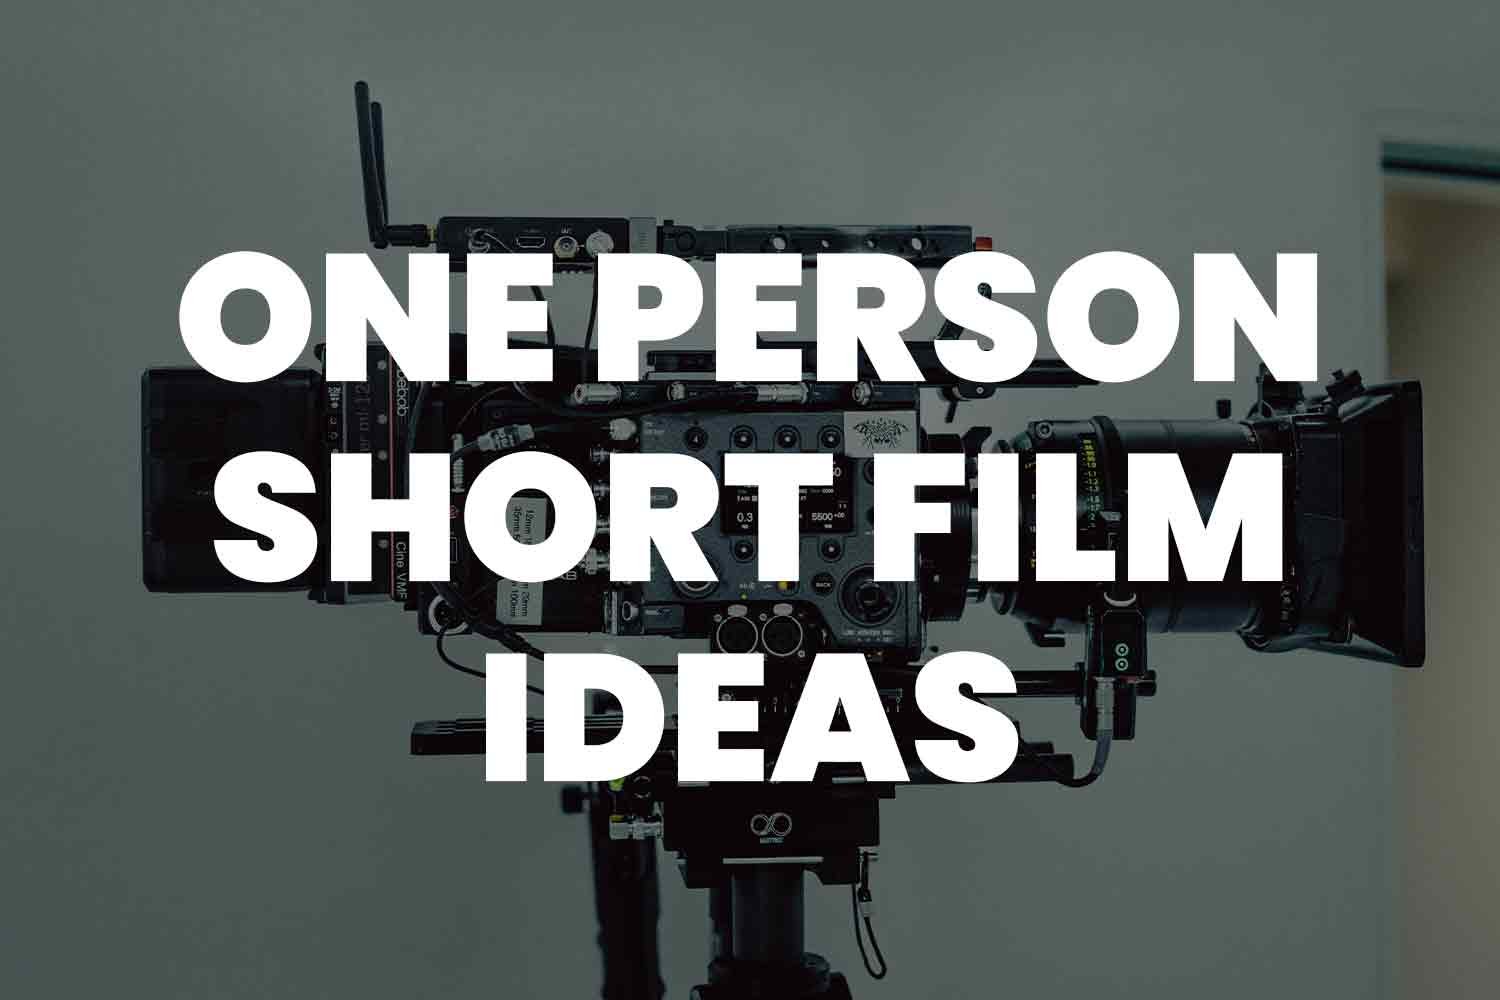 89+ One-Person Short Film Ideas To Get Your Creative Juices Flowing